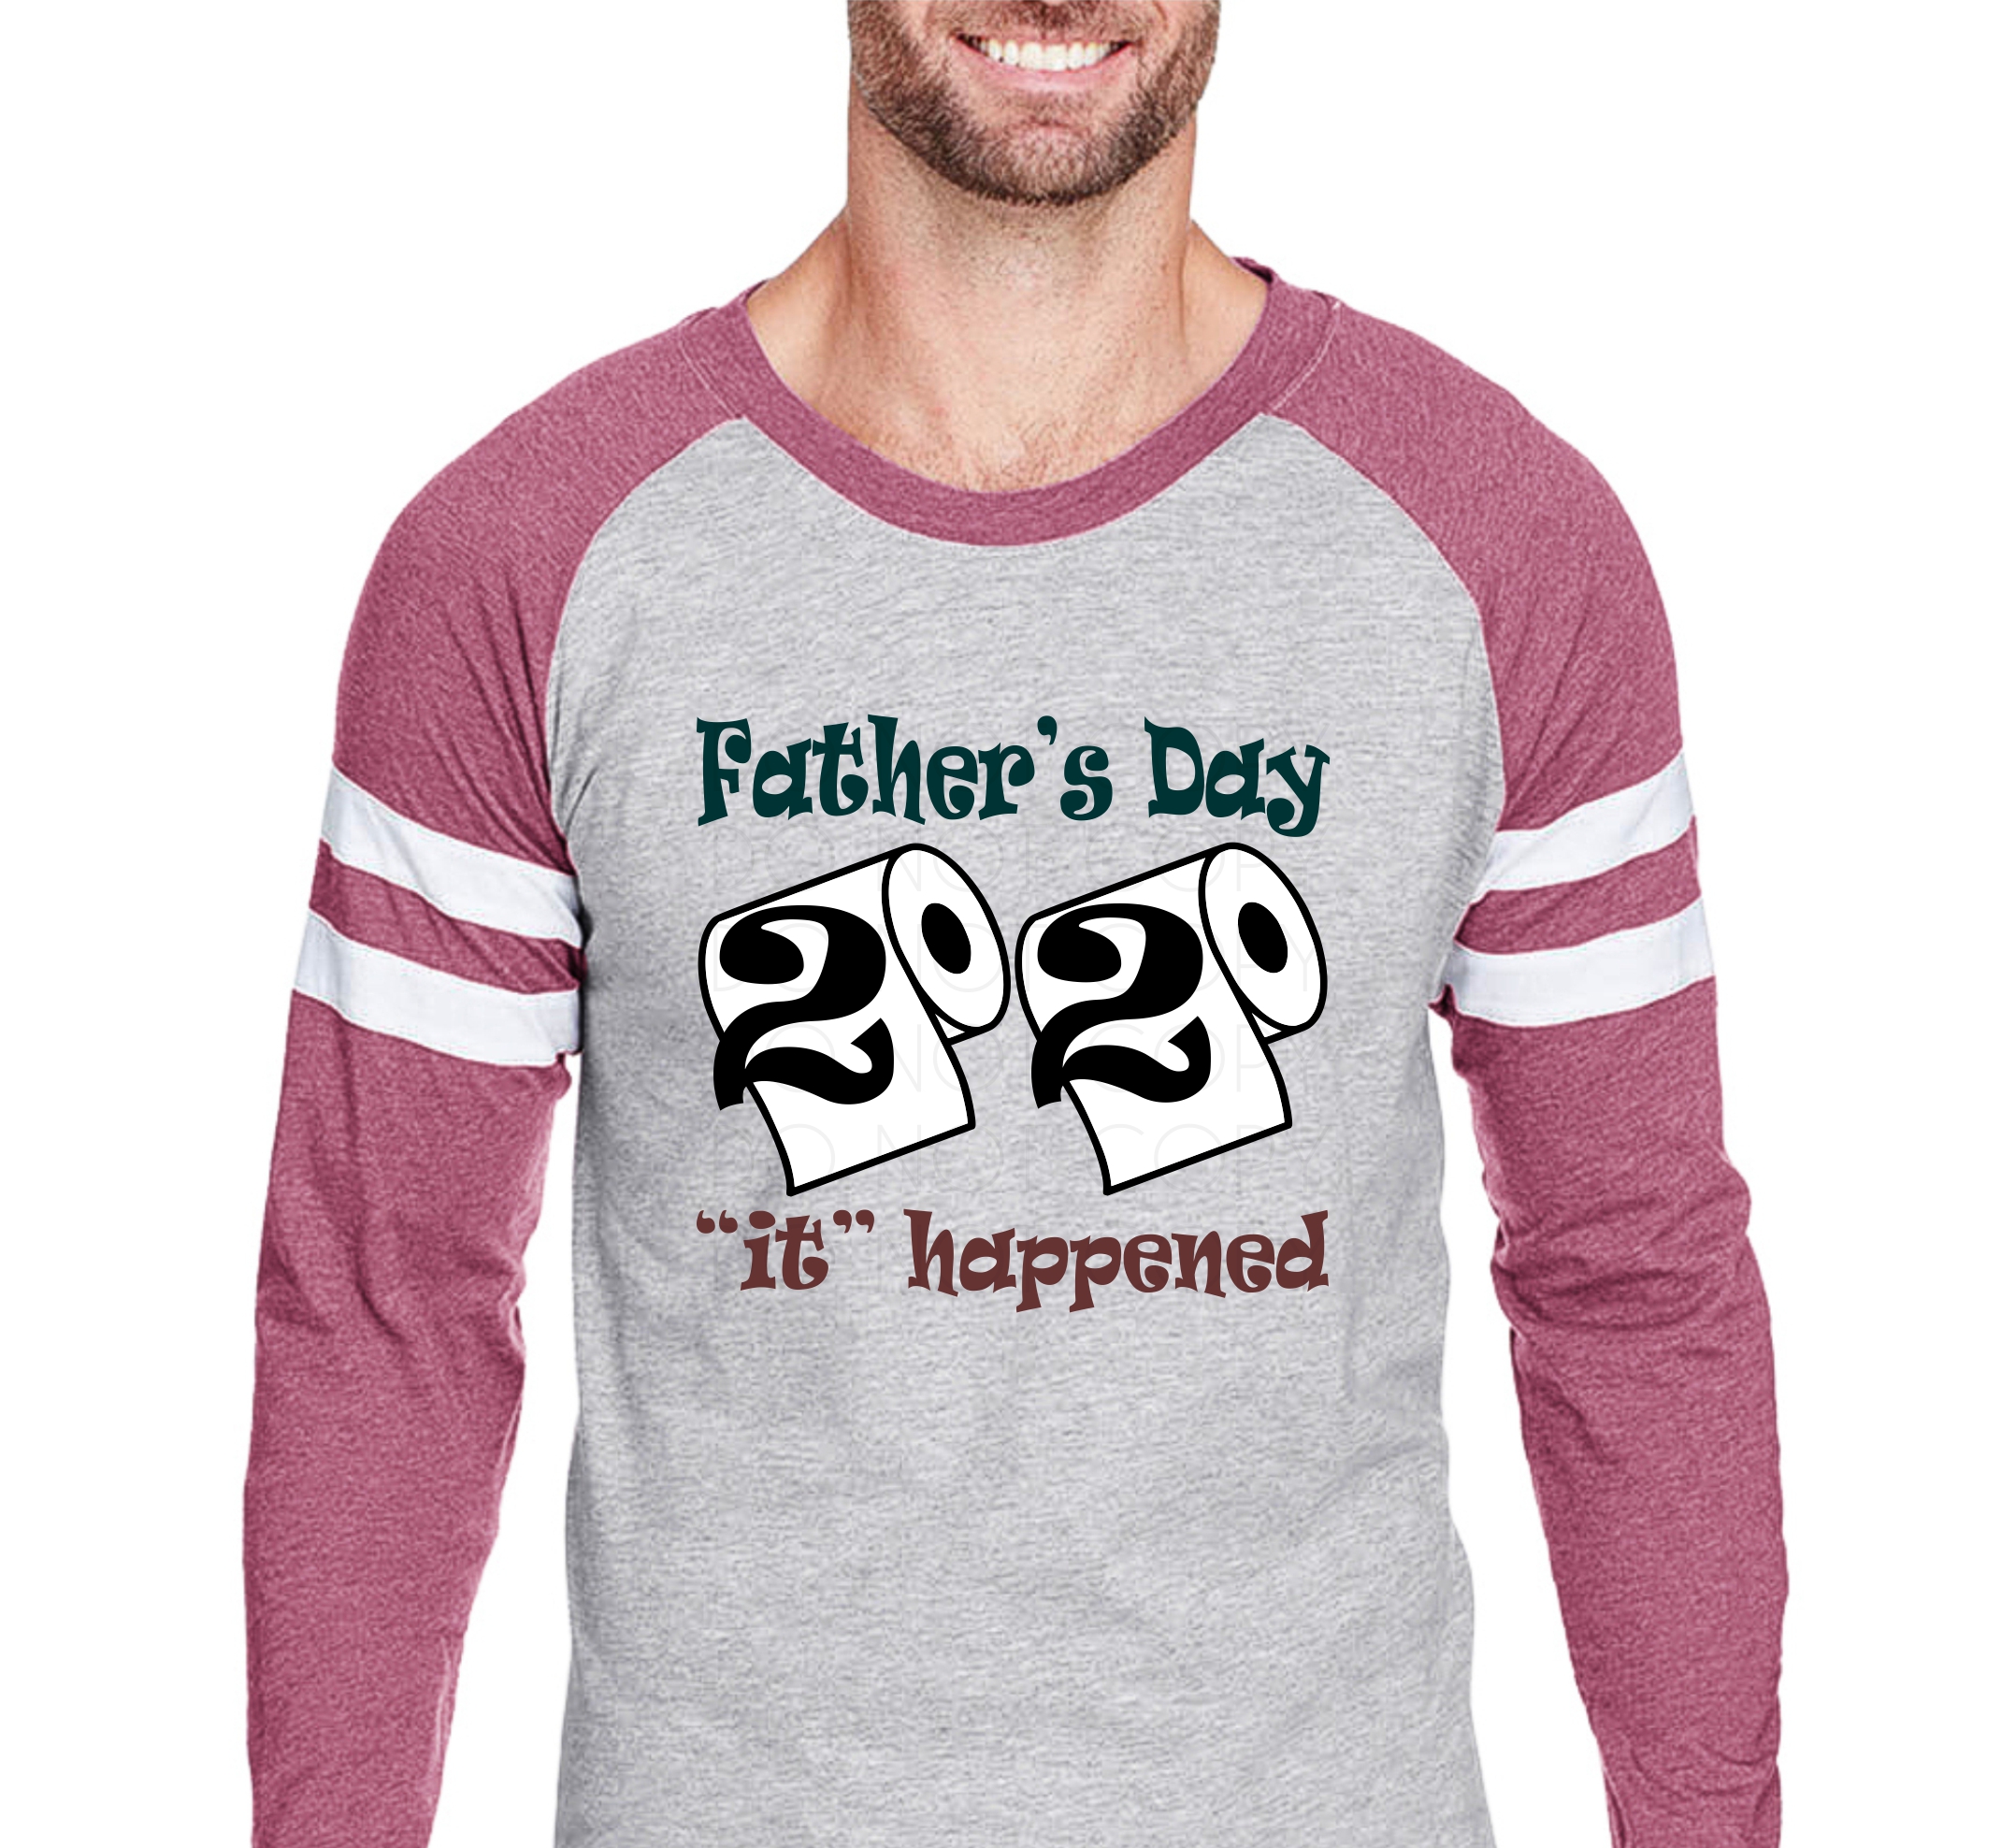 Download Father's Day 2020 It Happened SVG cut & print digital ...